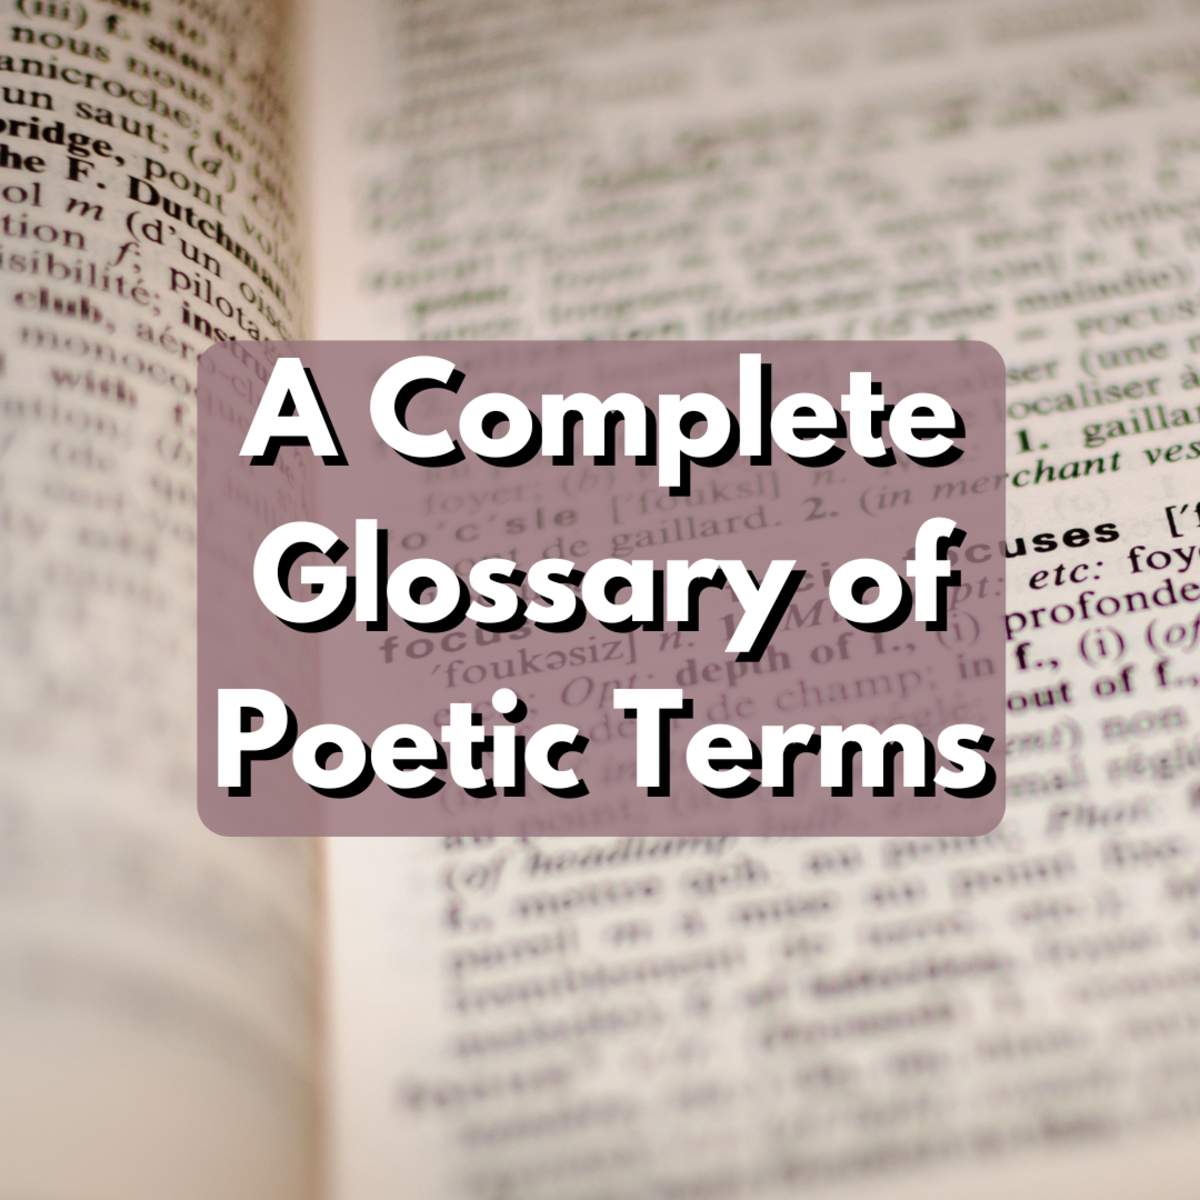 Read on to find an exhaustive list of poetic terminology!